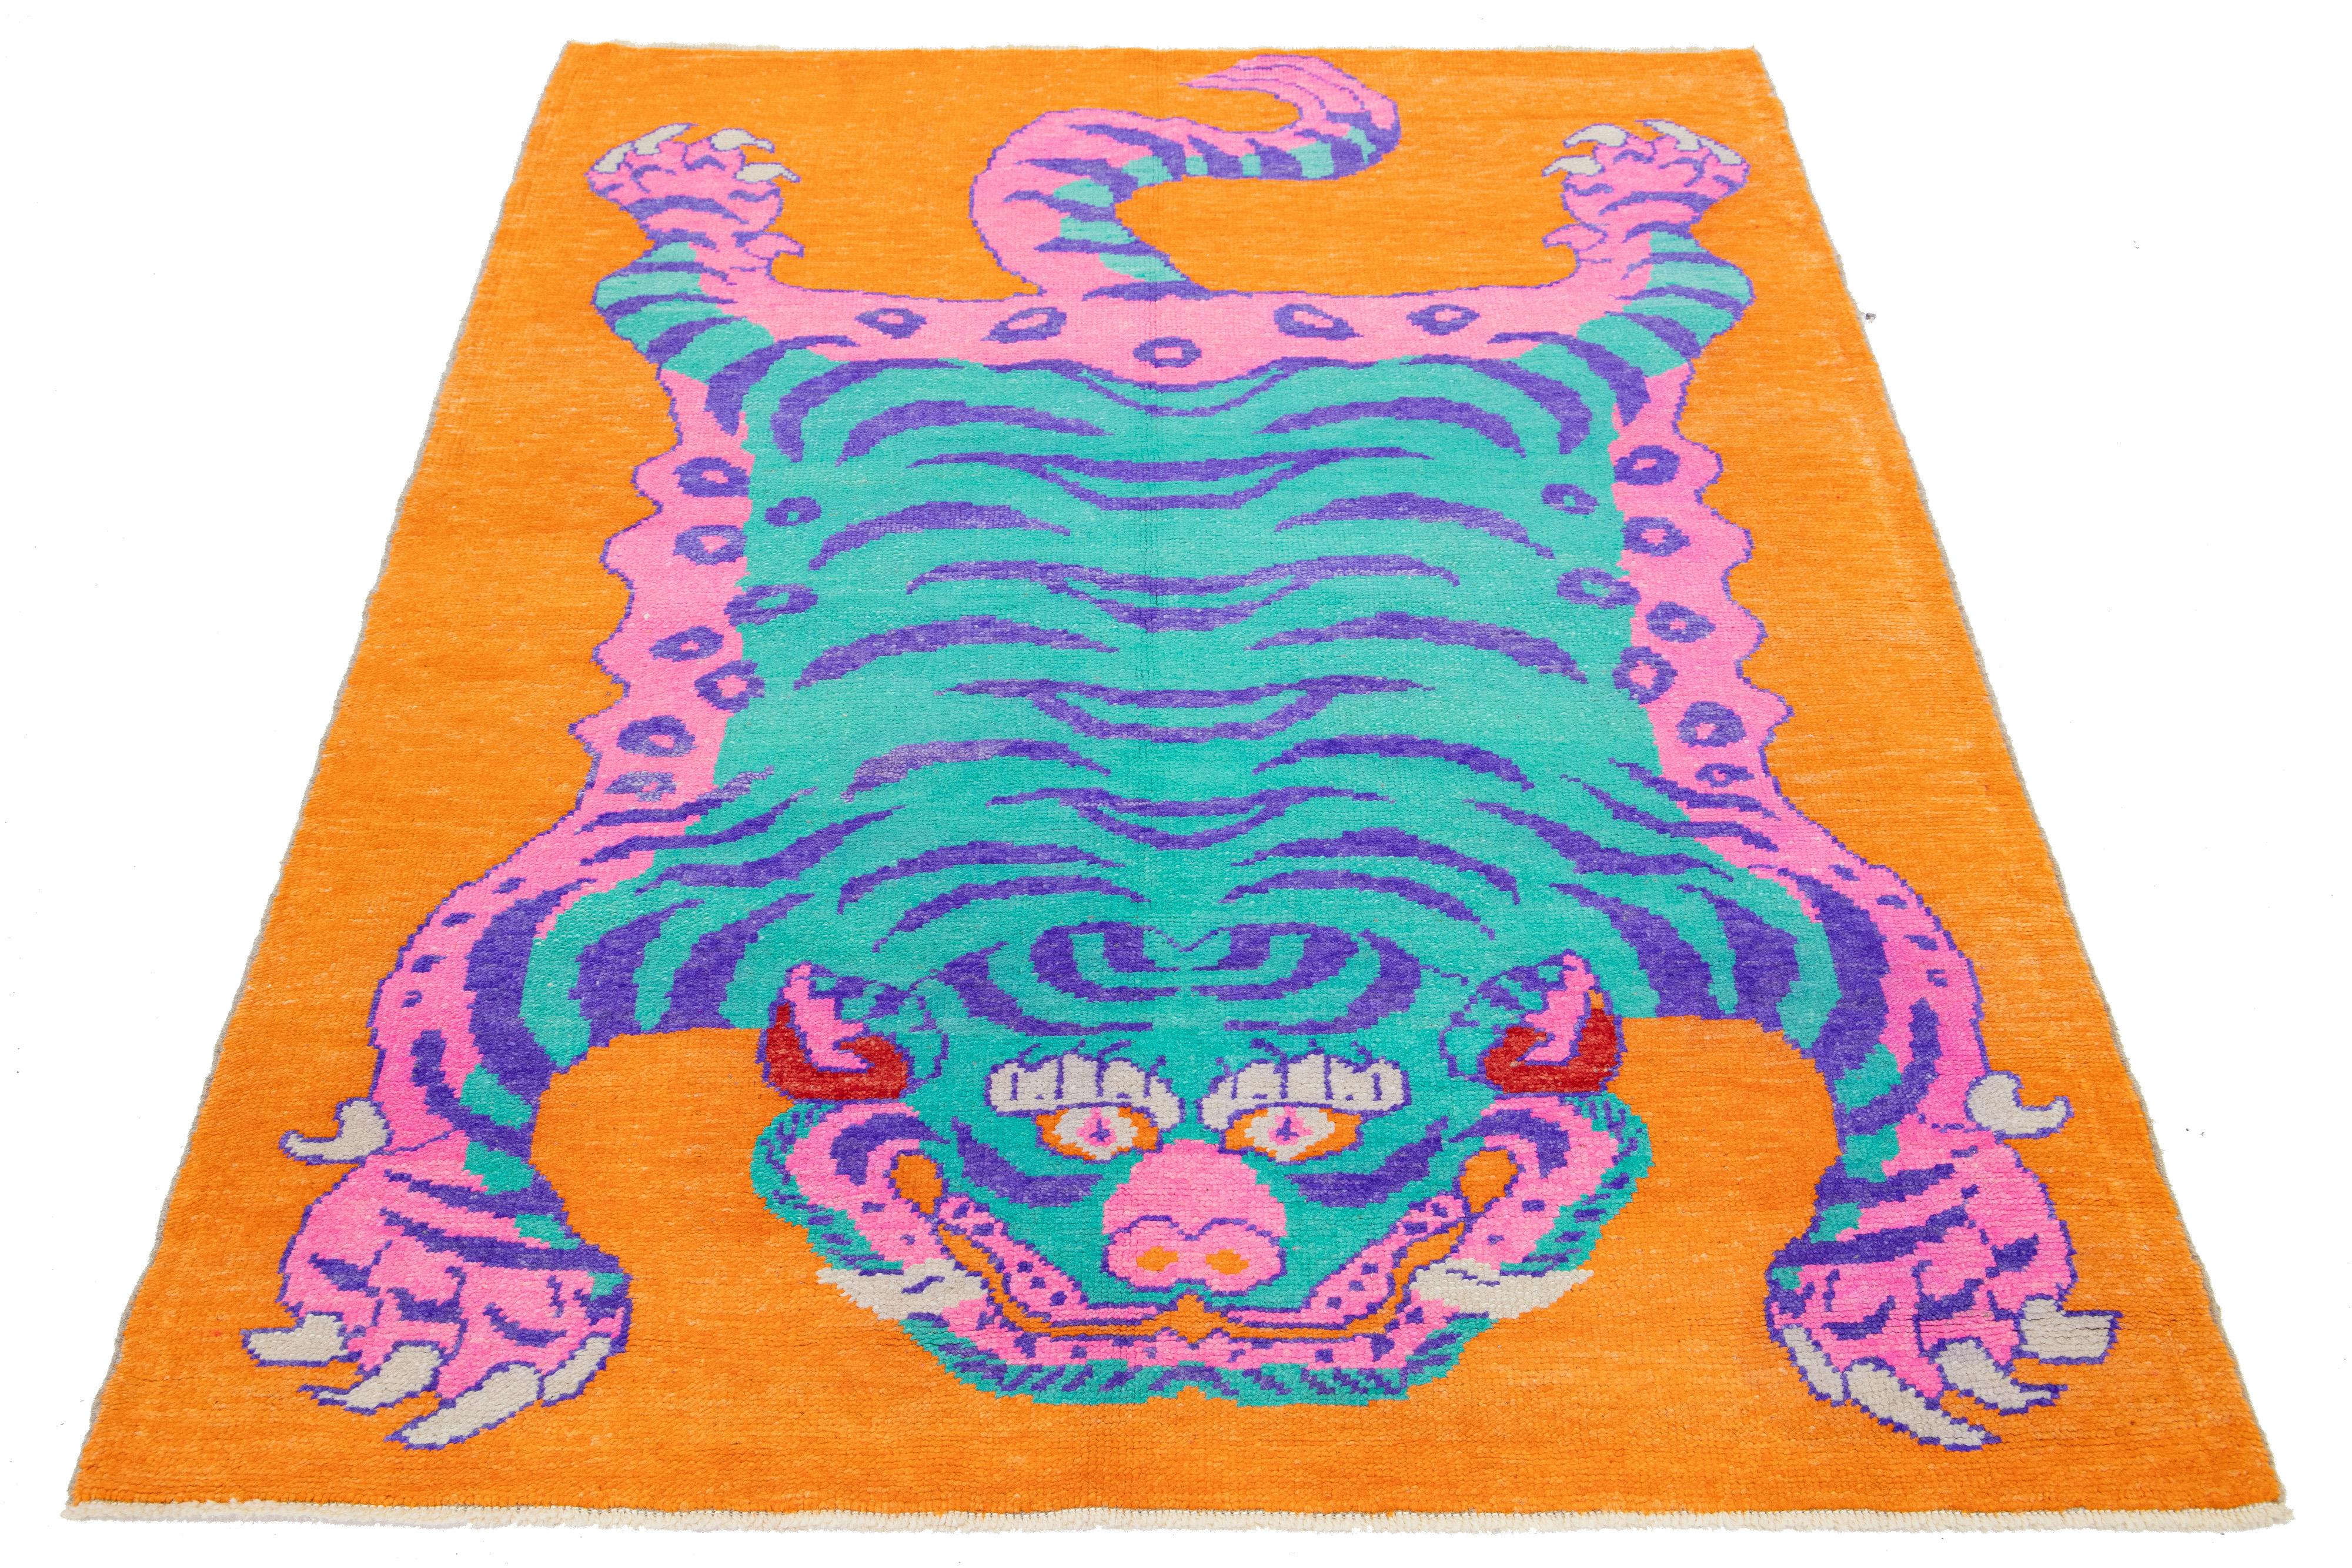 This is a beautiful handmade Turkish Art Deco wool rug with an orange field and blue, pink, and purple accent colors in a gorgeous tiger pictorial design. 

This rug measures 5'5